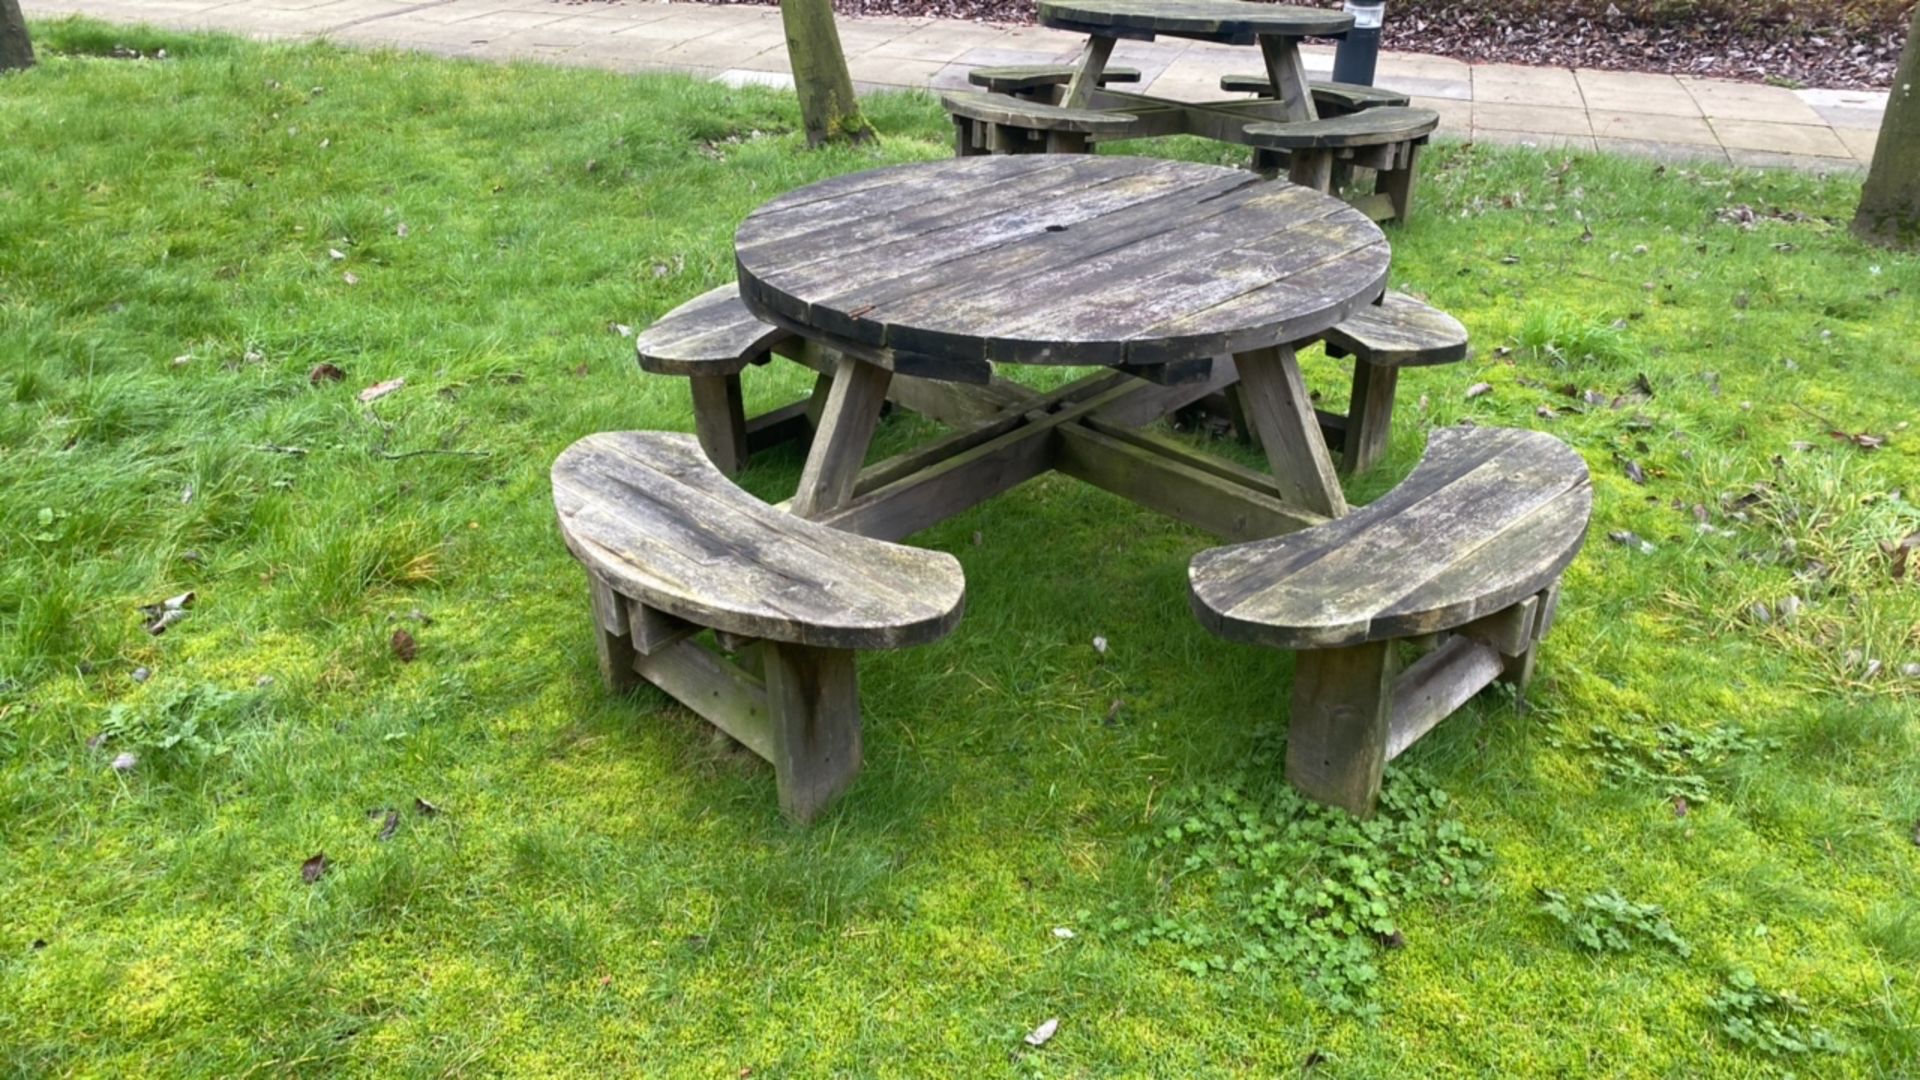 Outdoor Wooden Circular Seating Bench - Image 4 of 4